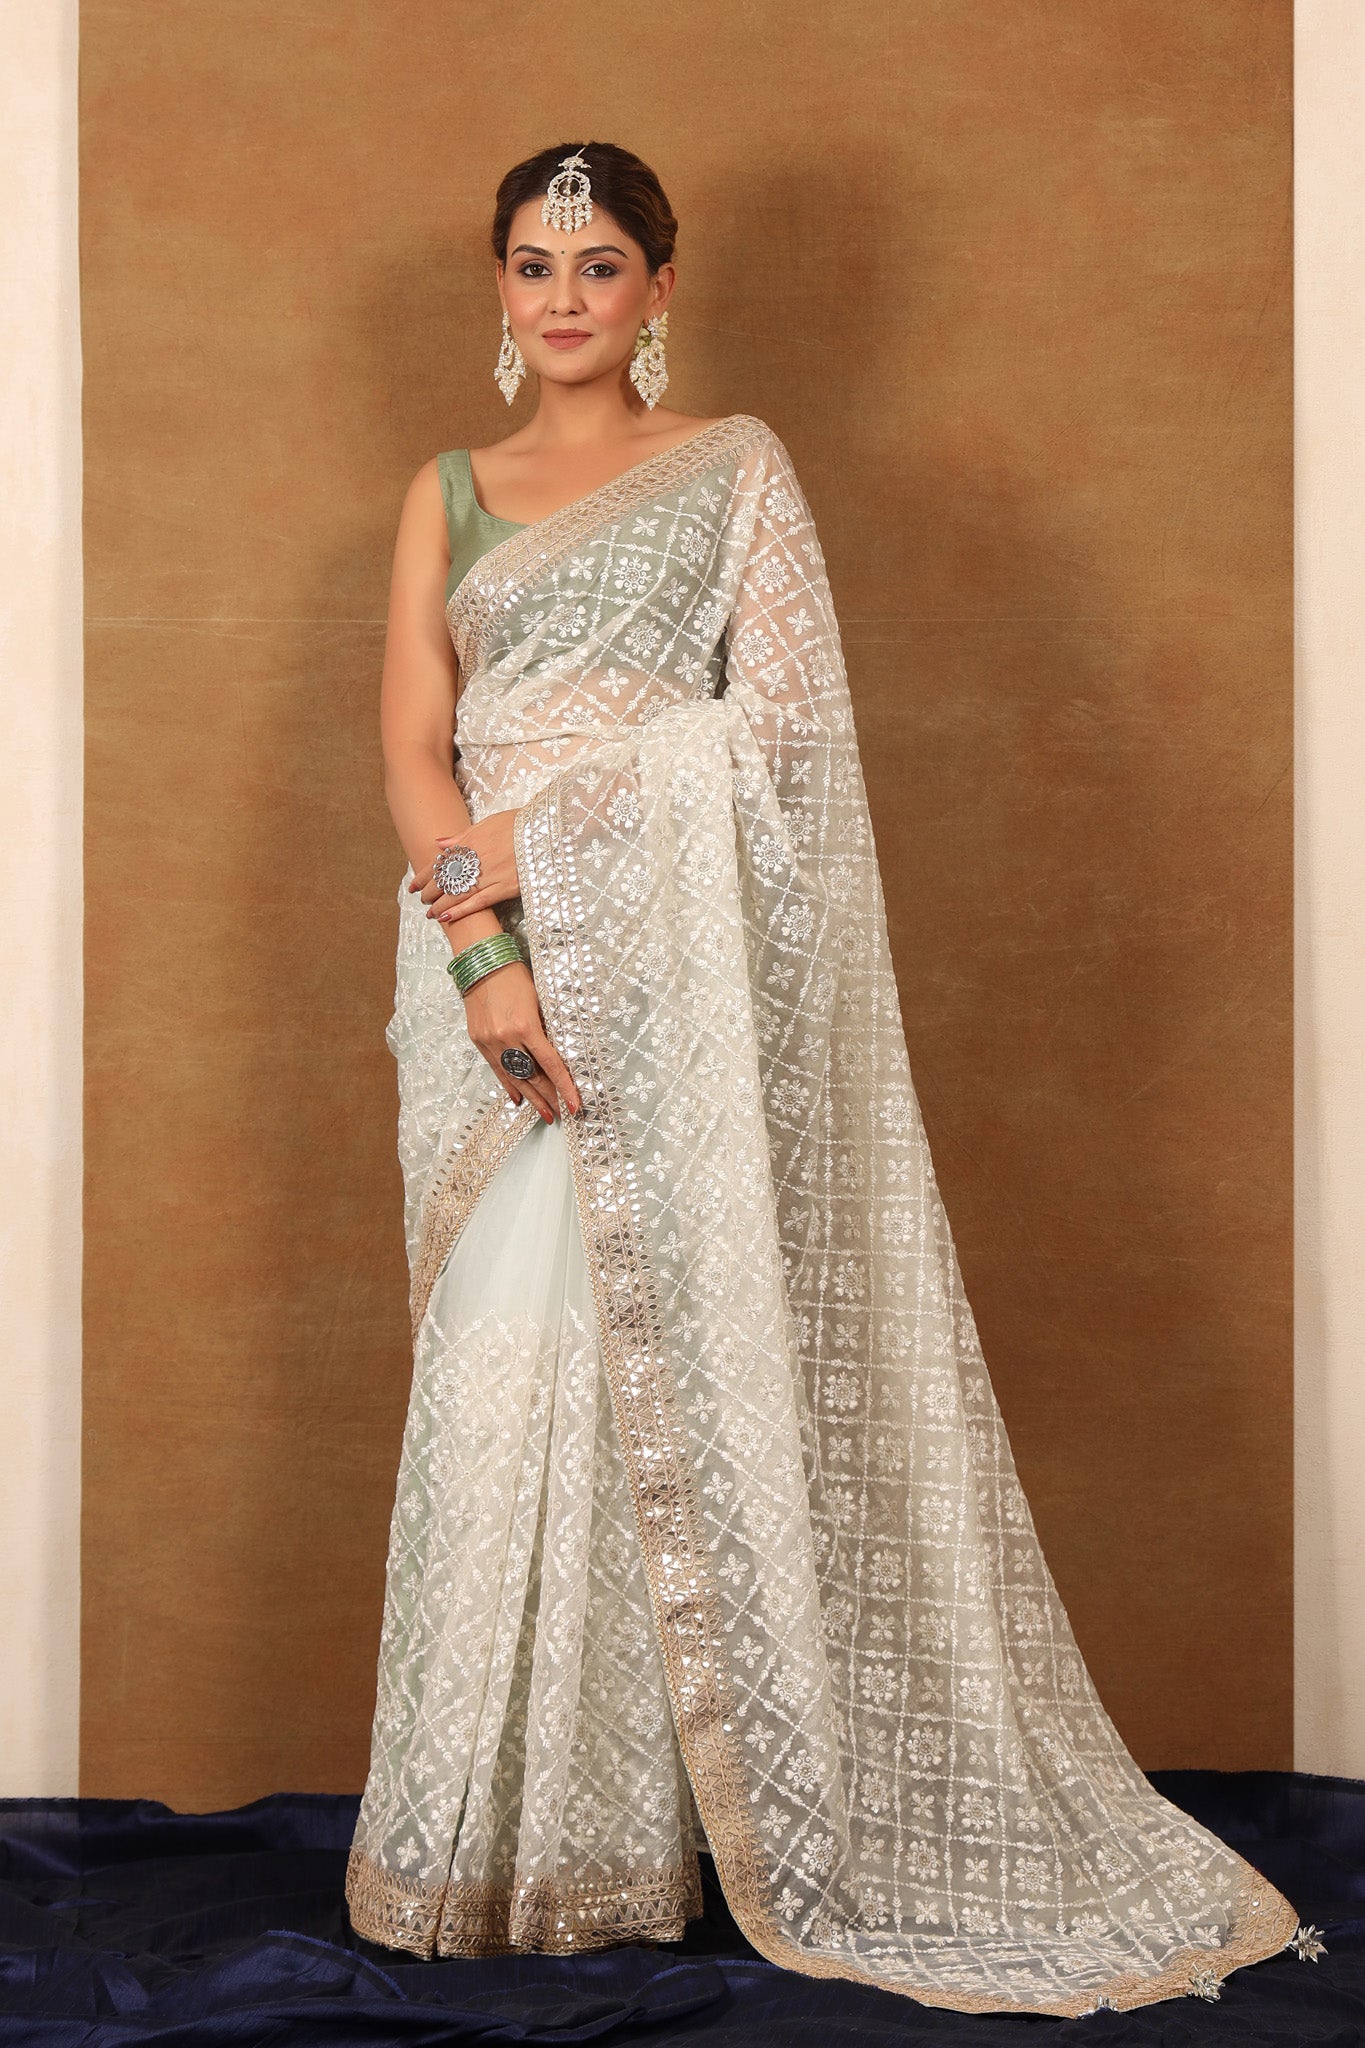 Buy Powder White Saree In Cotton Silk With Woven Golden Stripe Detailing  And Unstitched Blouse Online - Kalki Fashion